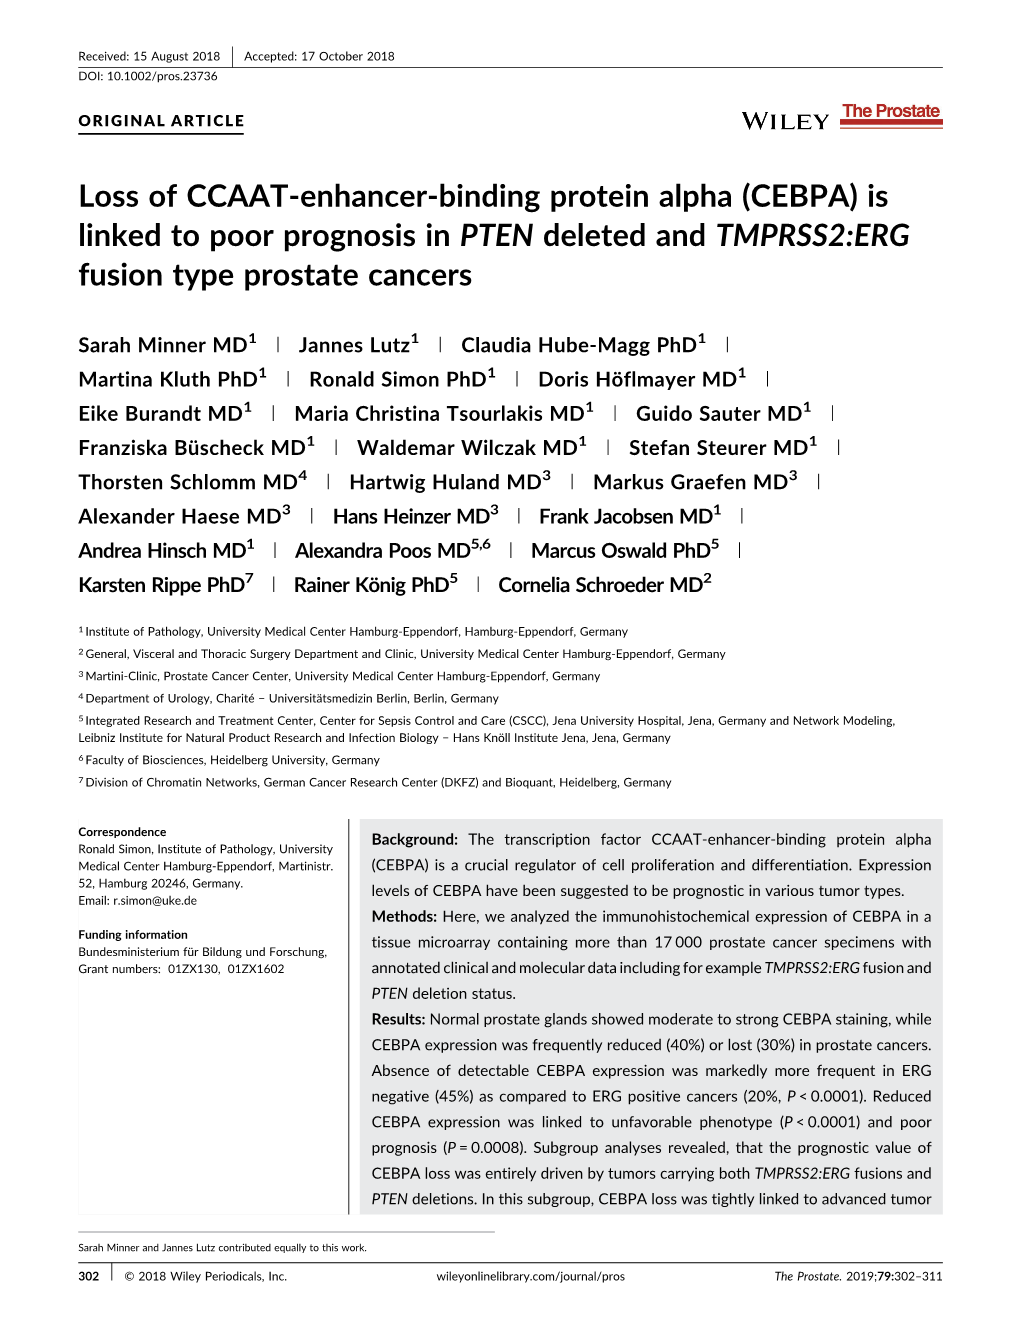 Loss of CCAAT-Enhancer-Binding Protein Alpha (CEBPA) Is Linked to Poor Prognosis in PTEN Deleted and TMPRSS2:ERG Fusion Type Prostate Cancers